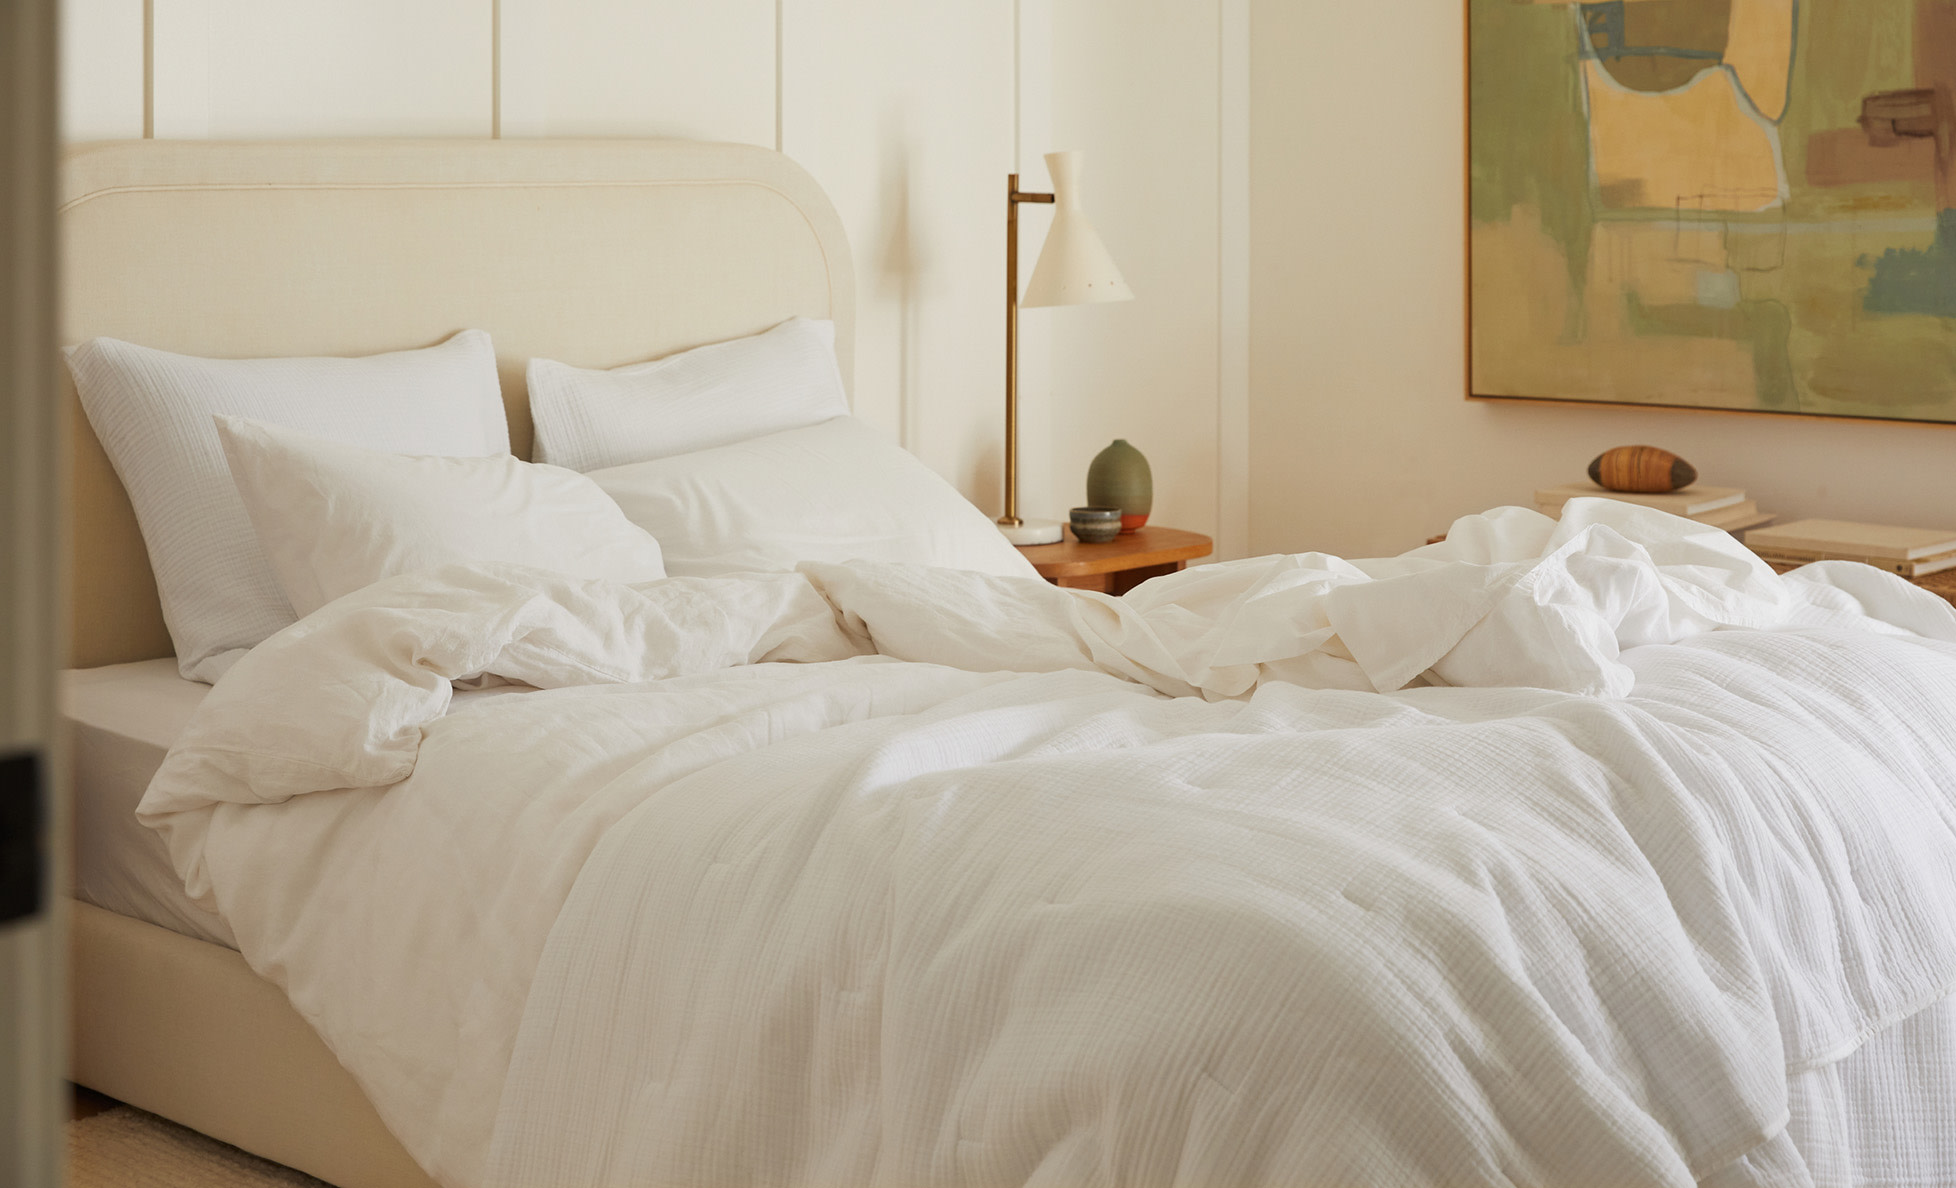 A messy bed with all-white sheets and blankets